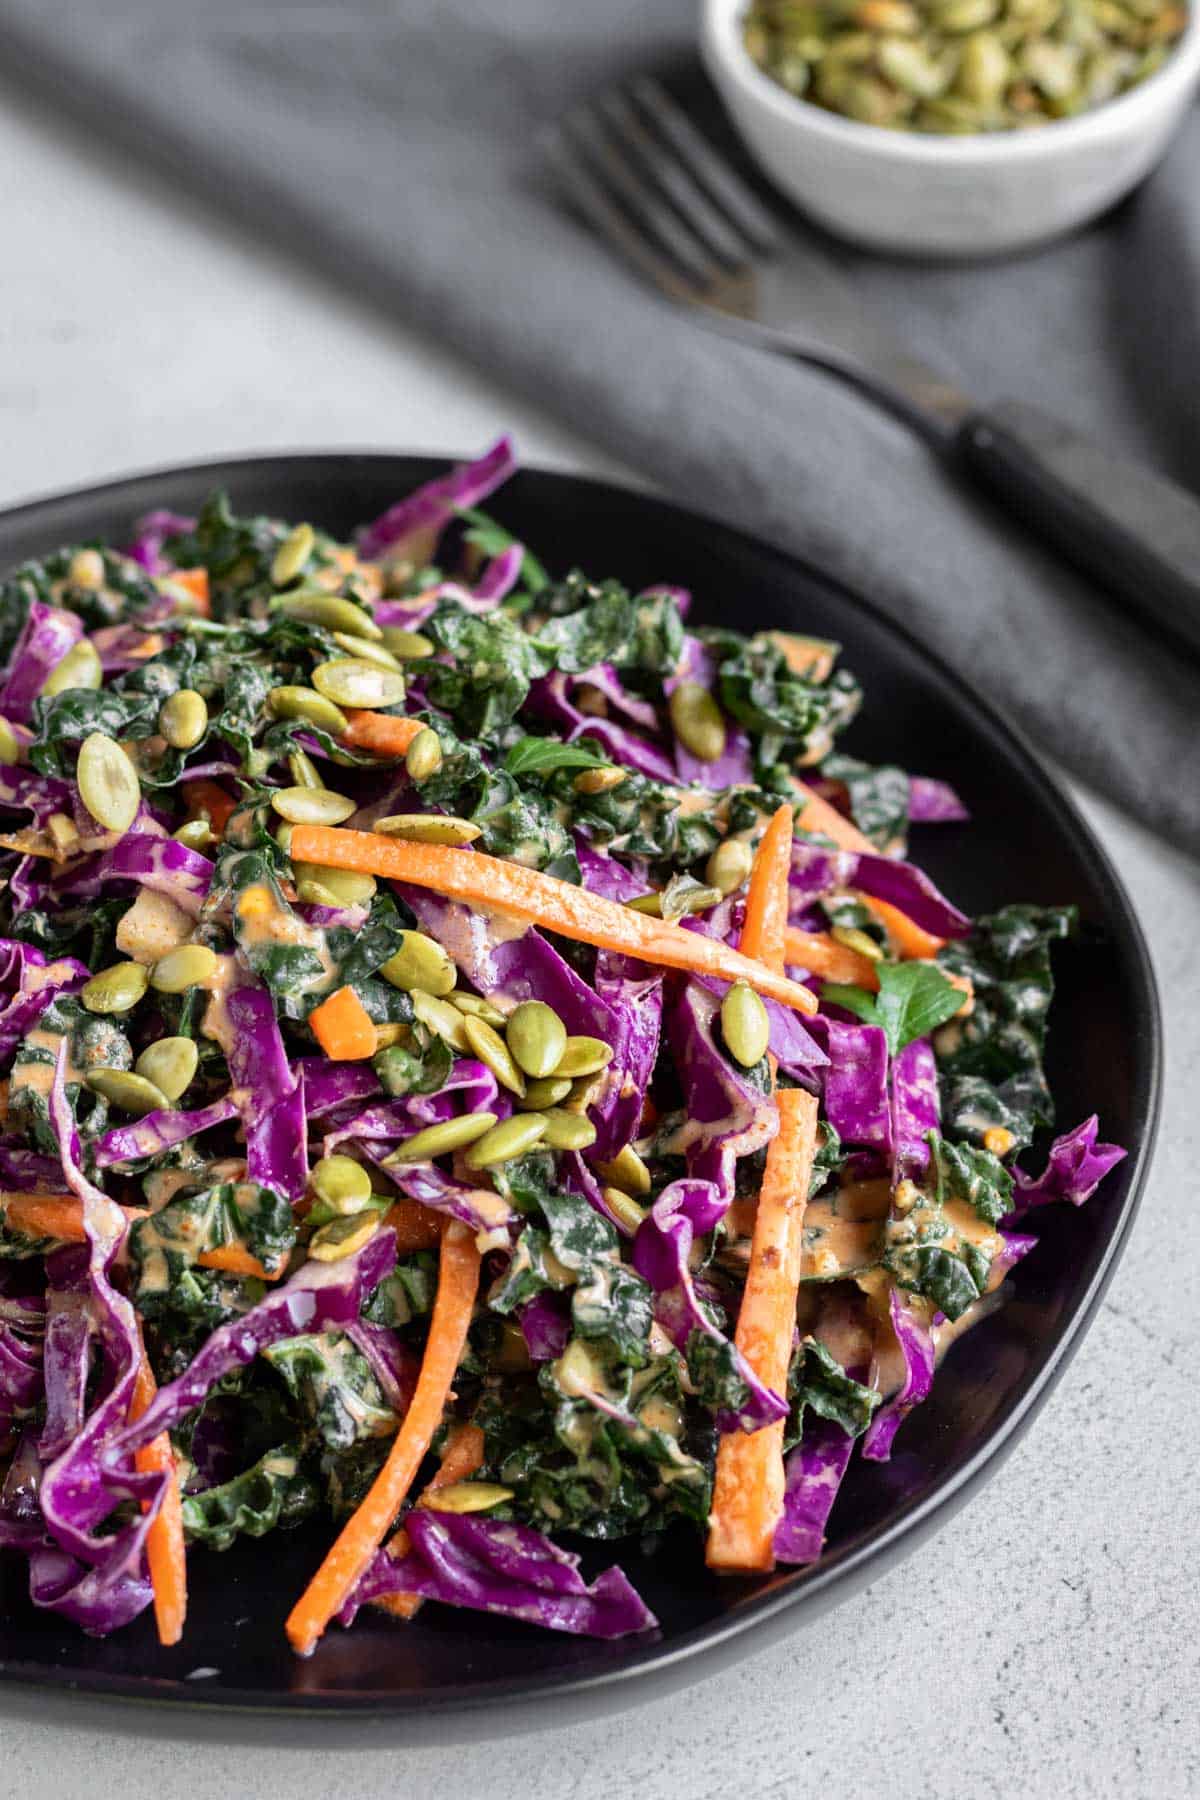 Kale slaw with carrot, red cabbage, and colorful harissa dressing on a black plate.